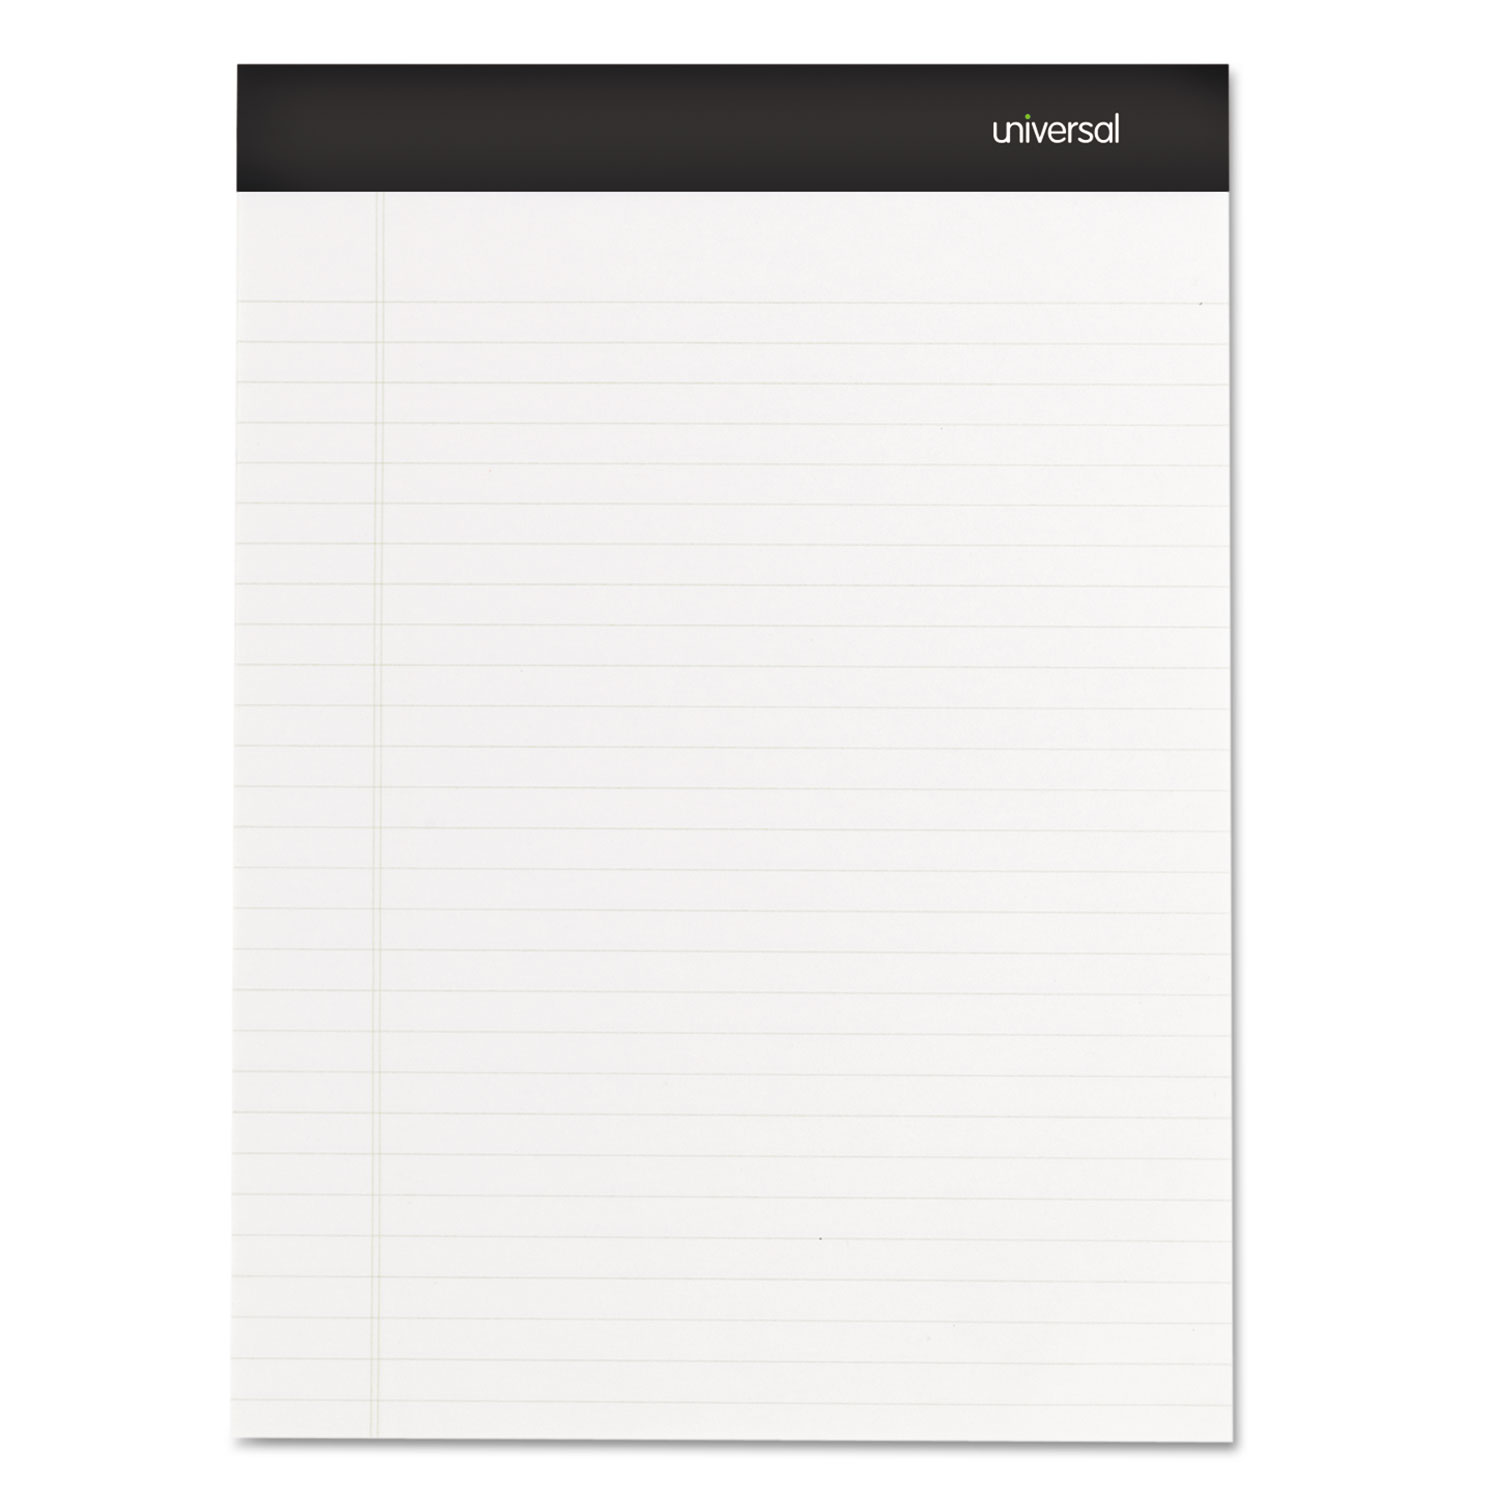 Sugarcane Based Writing Pads, 8 1/2 x 11 3/4, Legal, White, 50 Sheets, 2/Pack